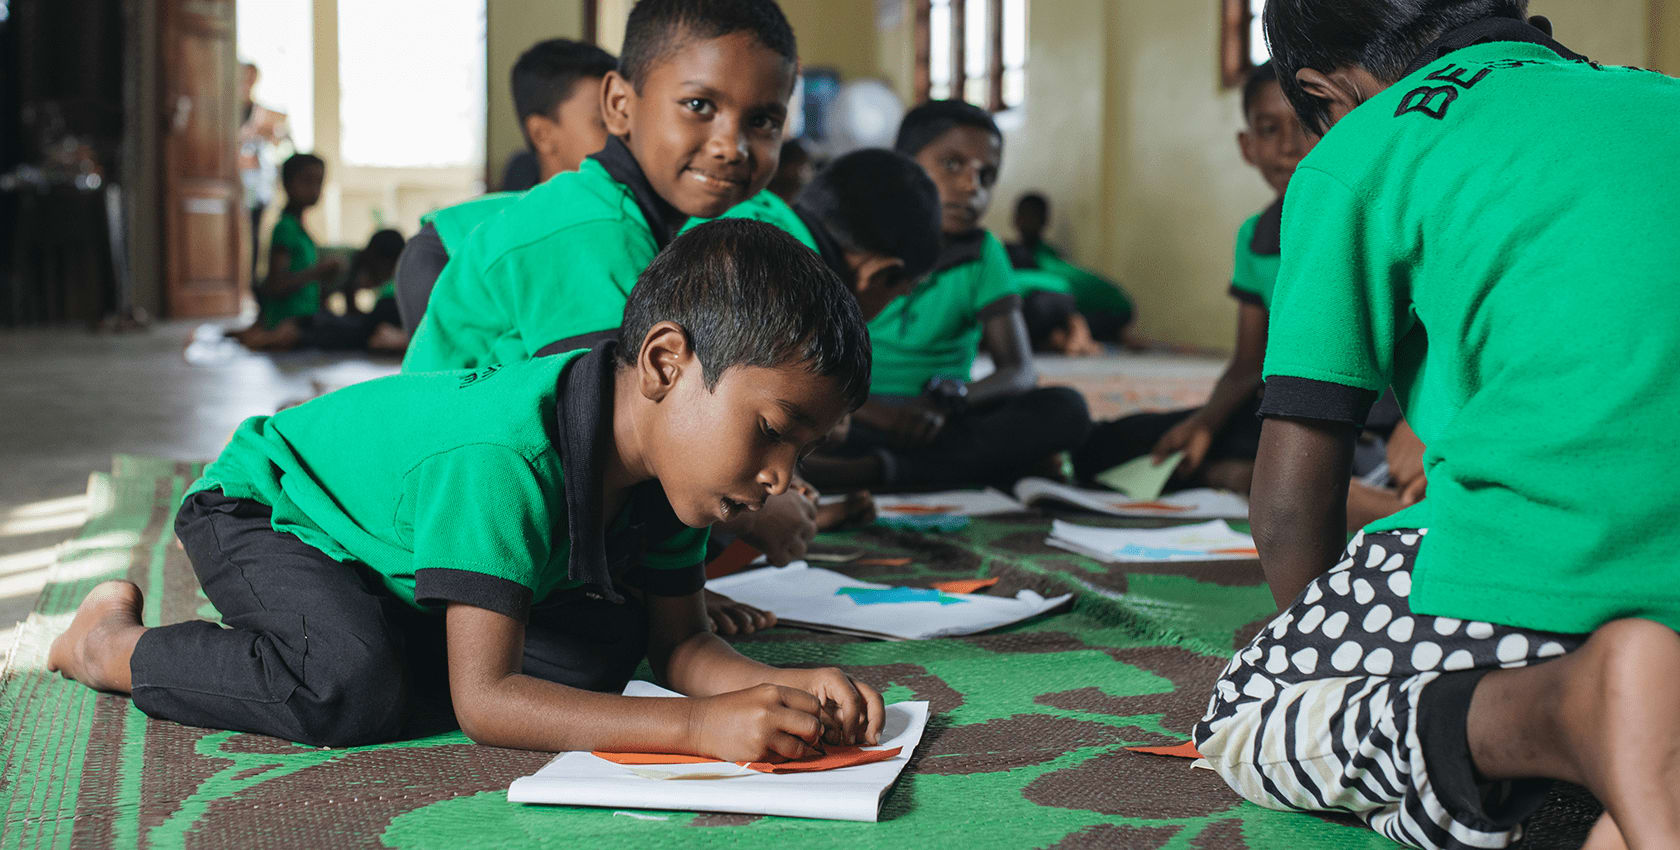 Boys wearing green school uniforms sit at desks and write on work sheets